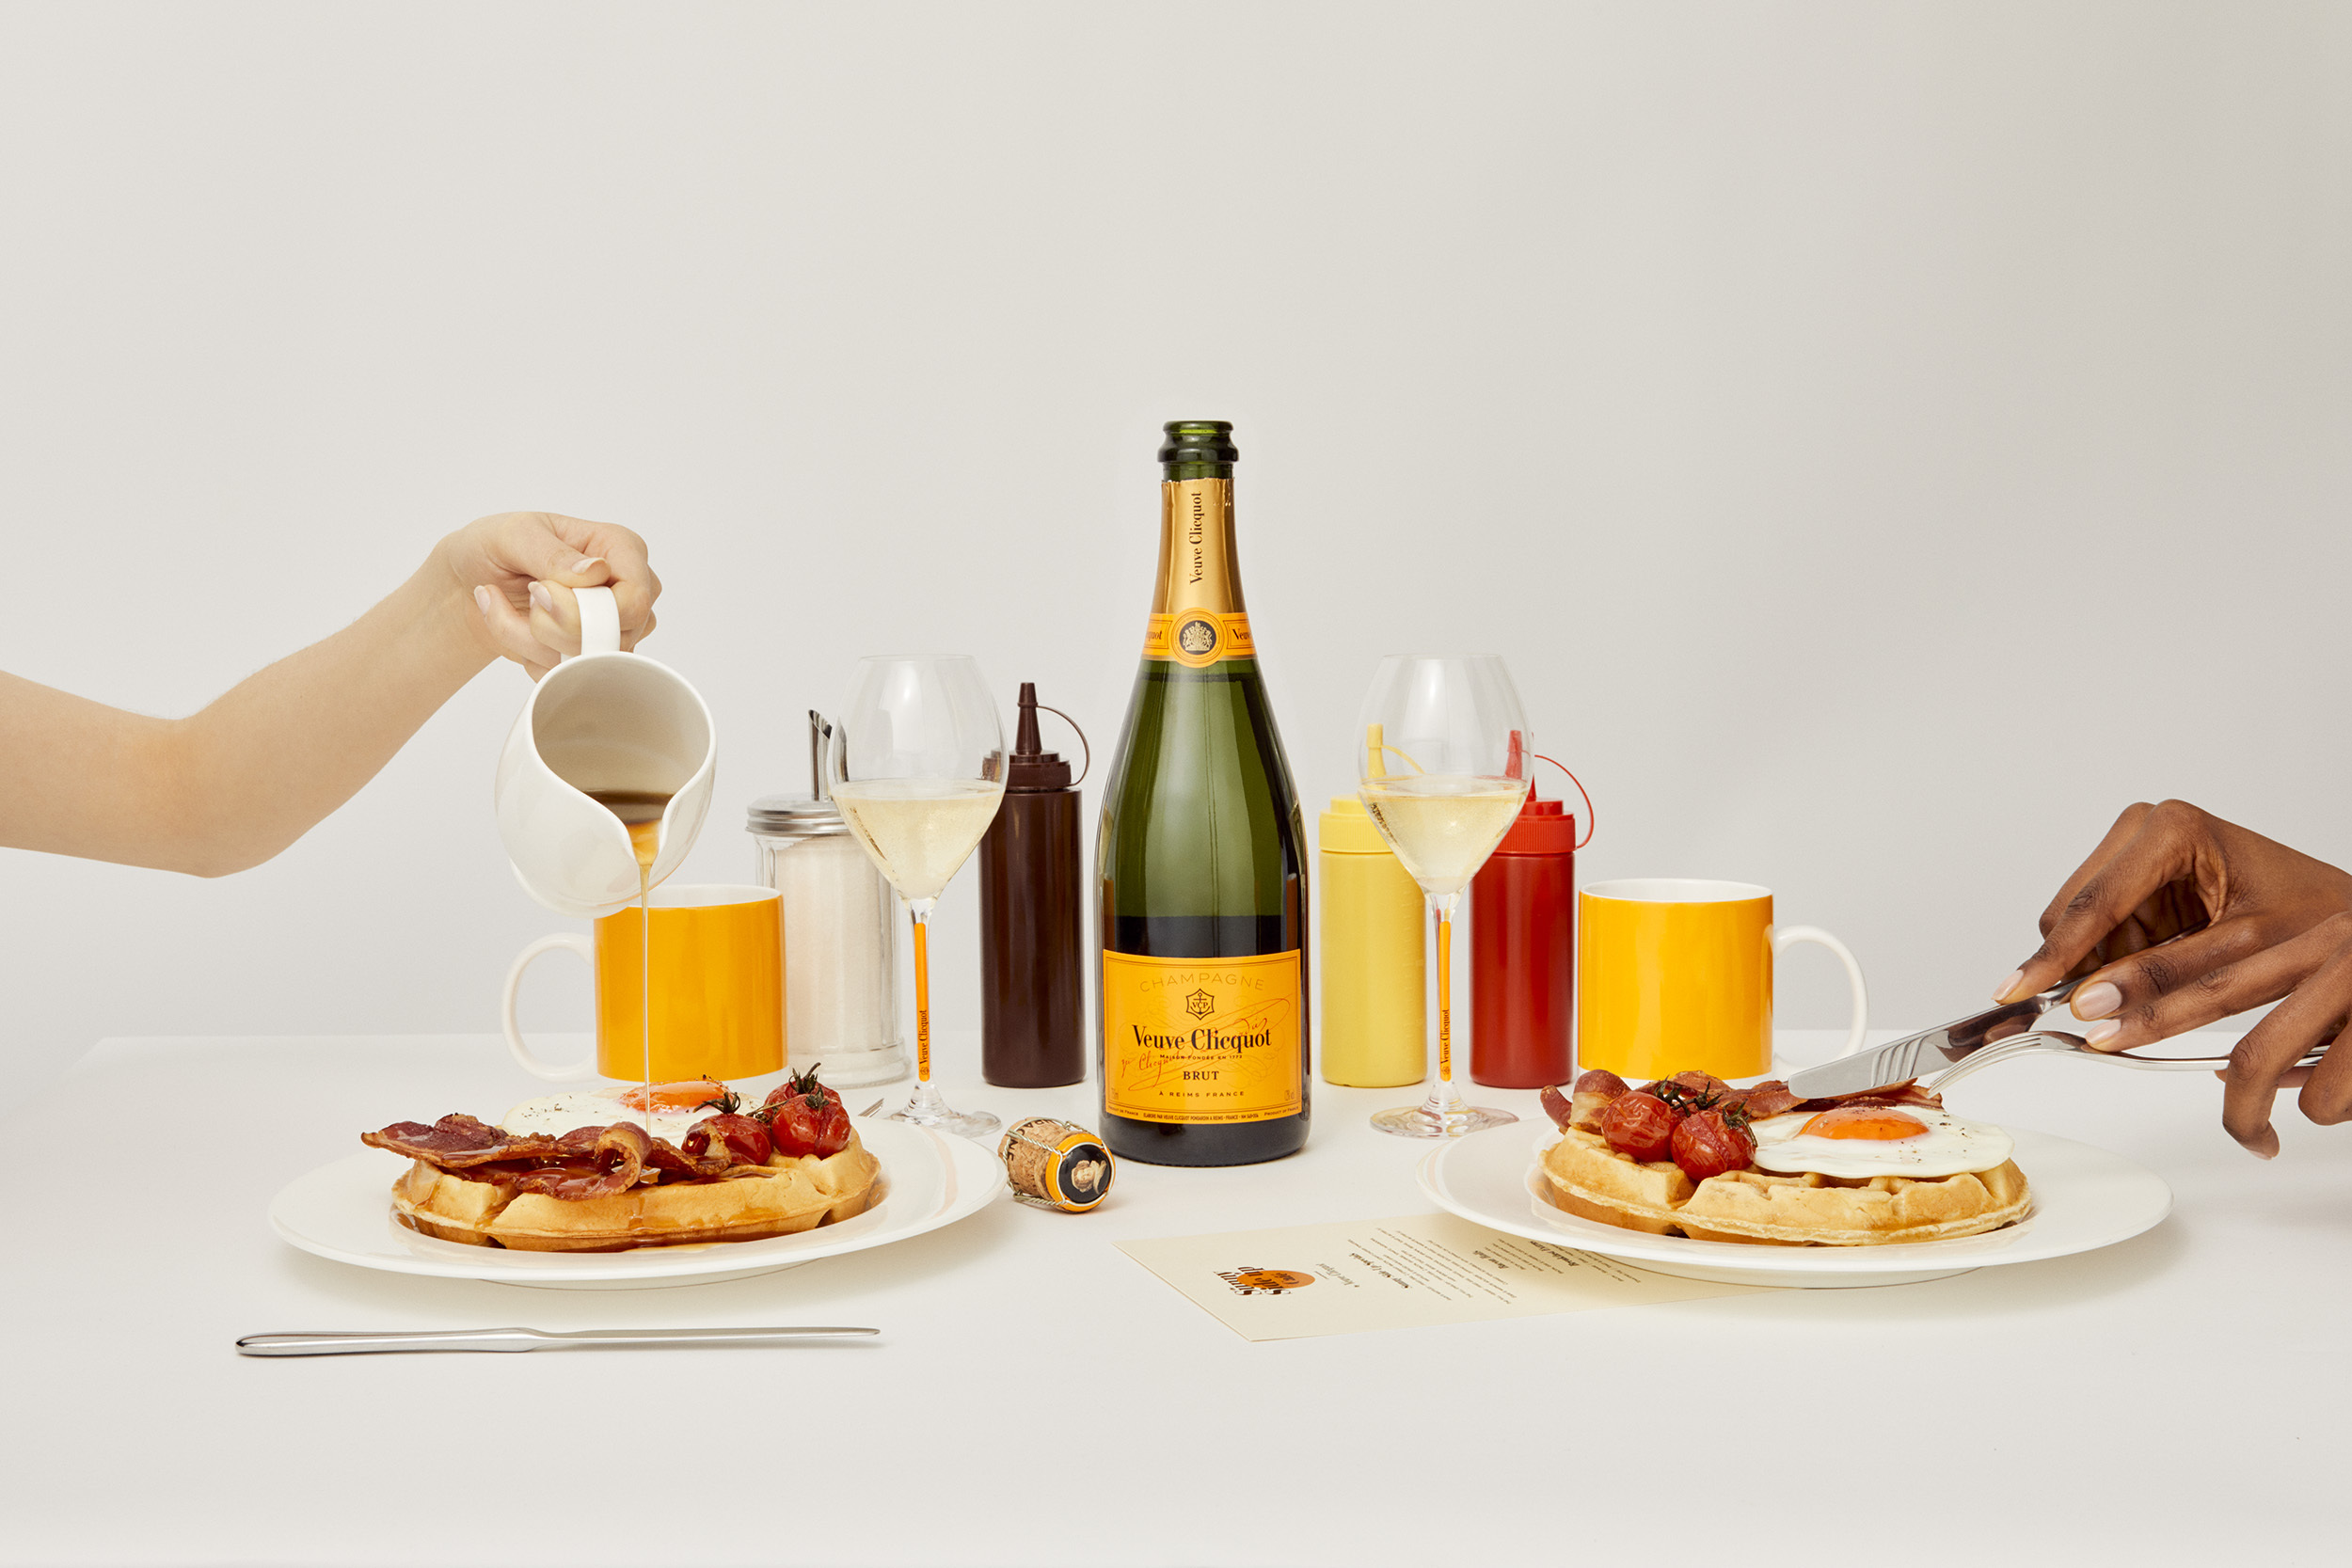 Veuve Clicquot Champagne launches pop-up café in Soho to celebrate 250th anniversary